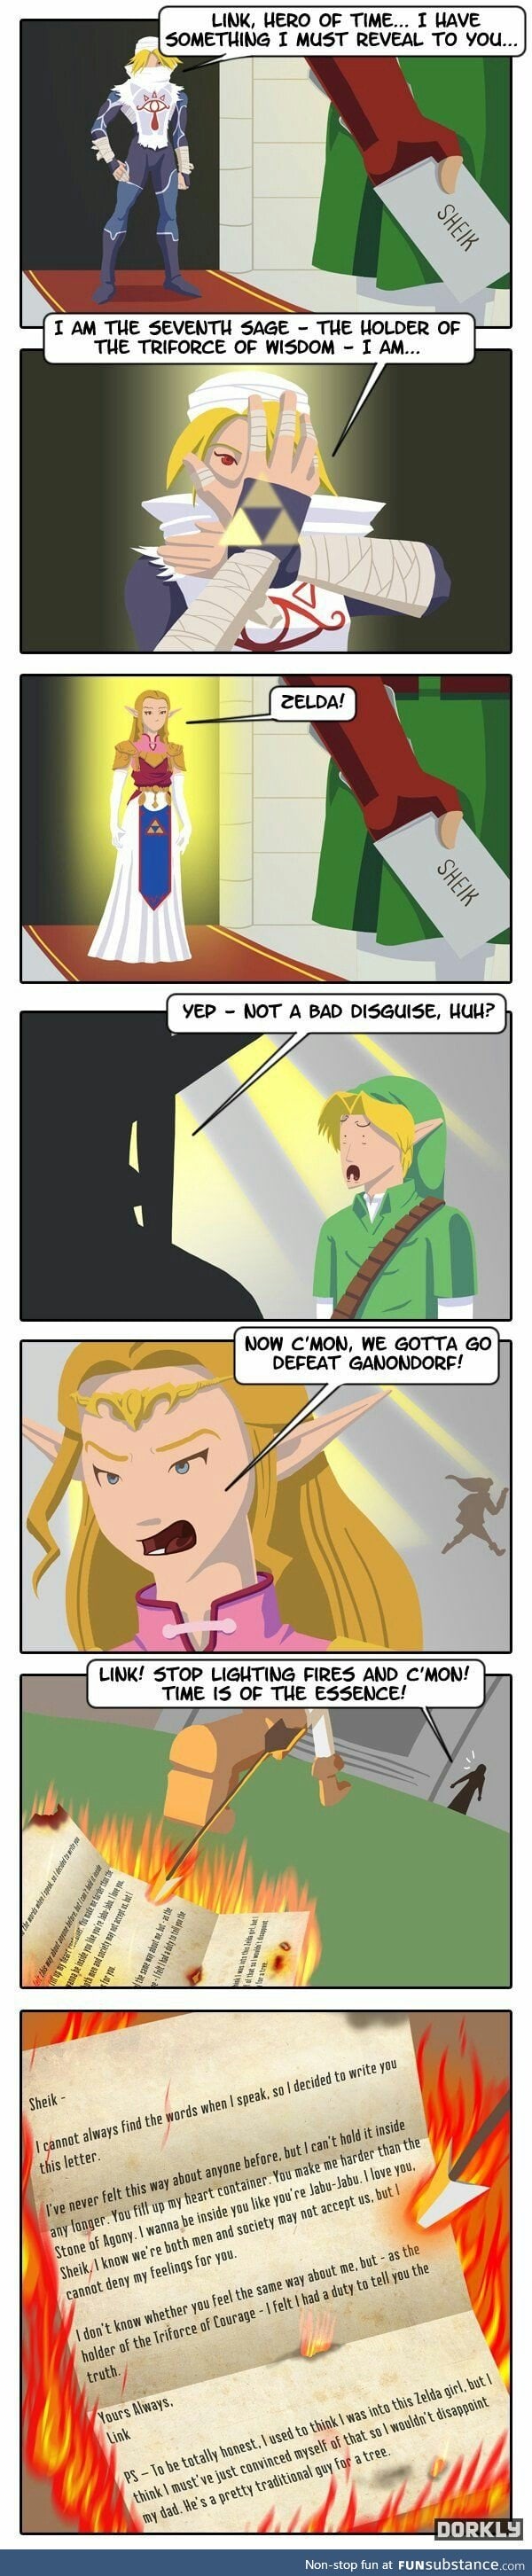 sorry, link